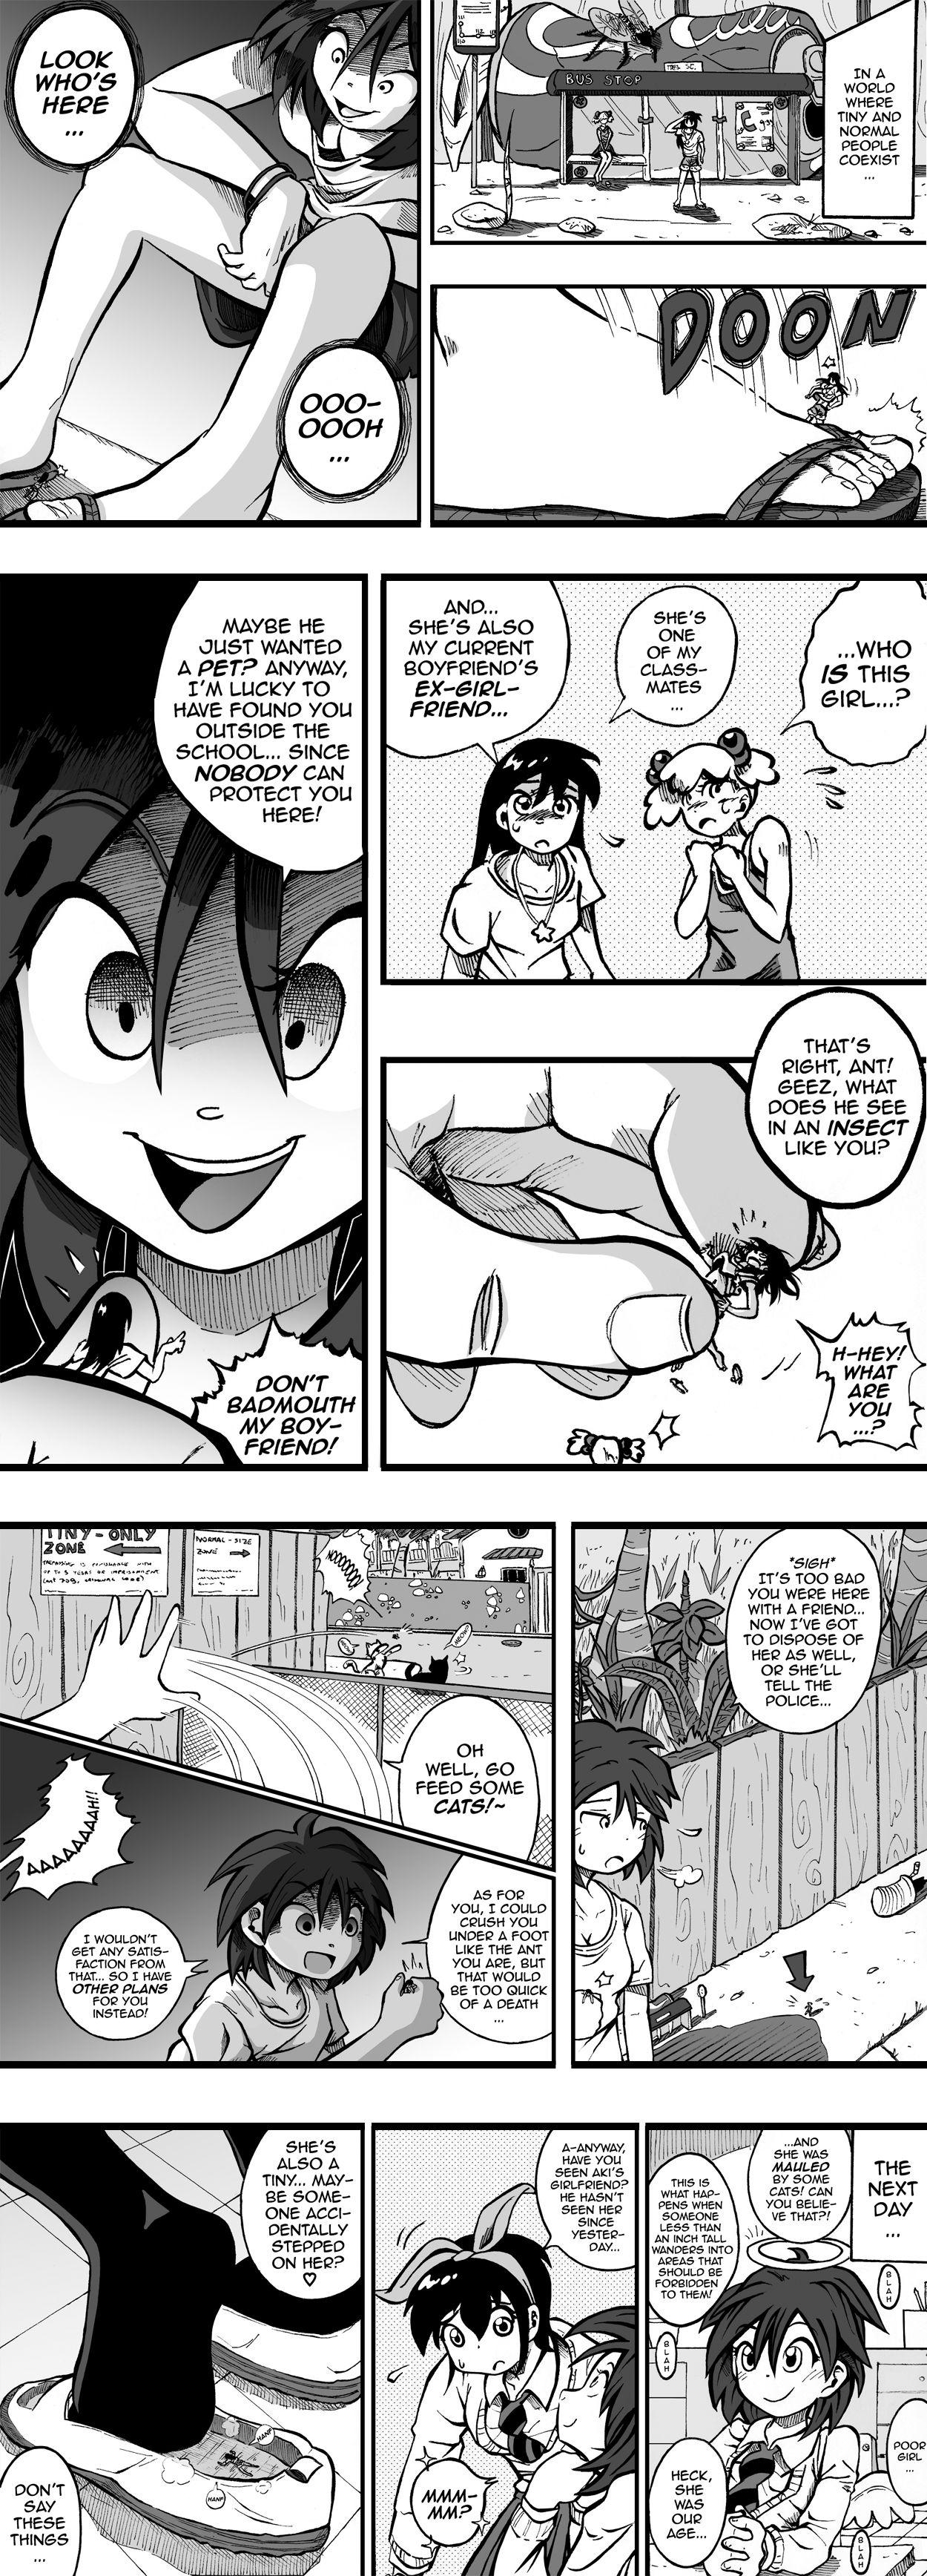 Sucking Half Inch High ( by labbaART ) Ongoing Chacal - Page 3